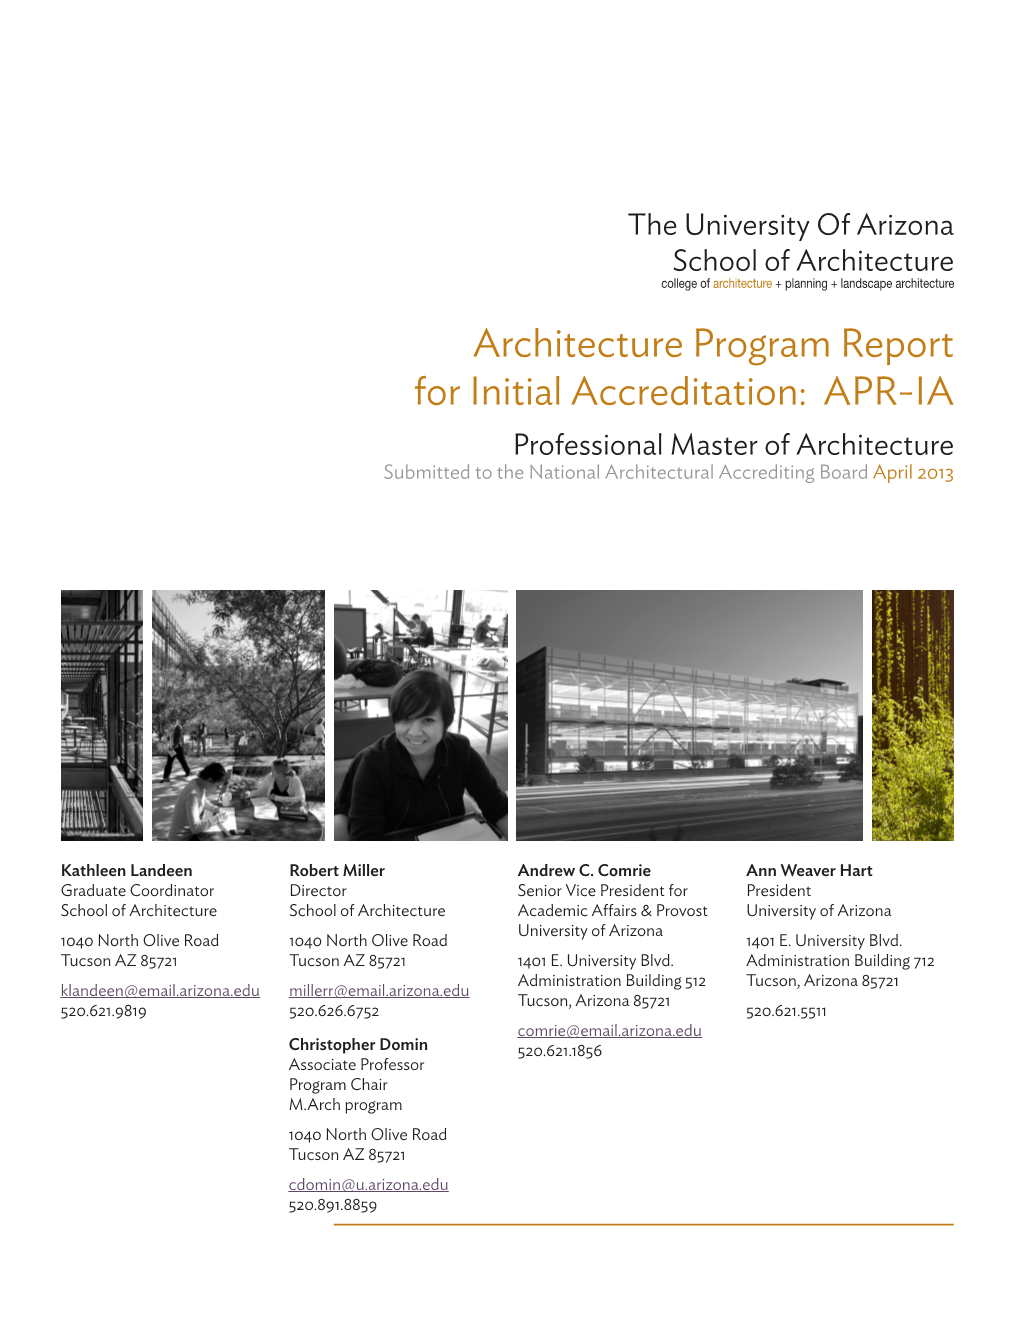 Architecture Program Report for Initial Accreditation: APR-IA Professional Master of Architecture Submitted to the National Architectural Accrediting Board April 2013